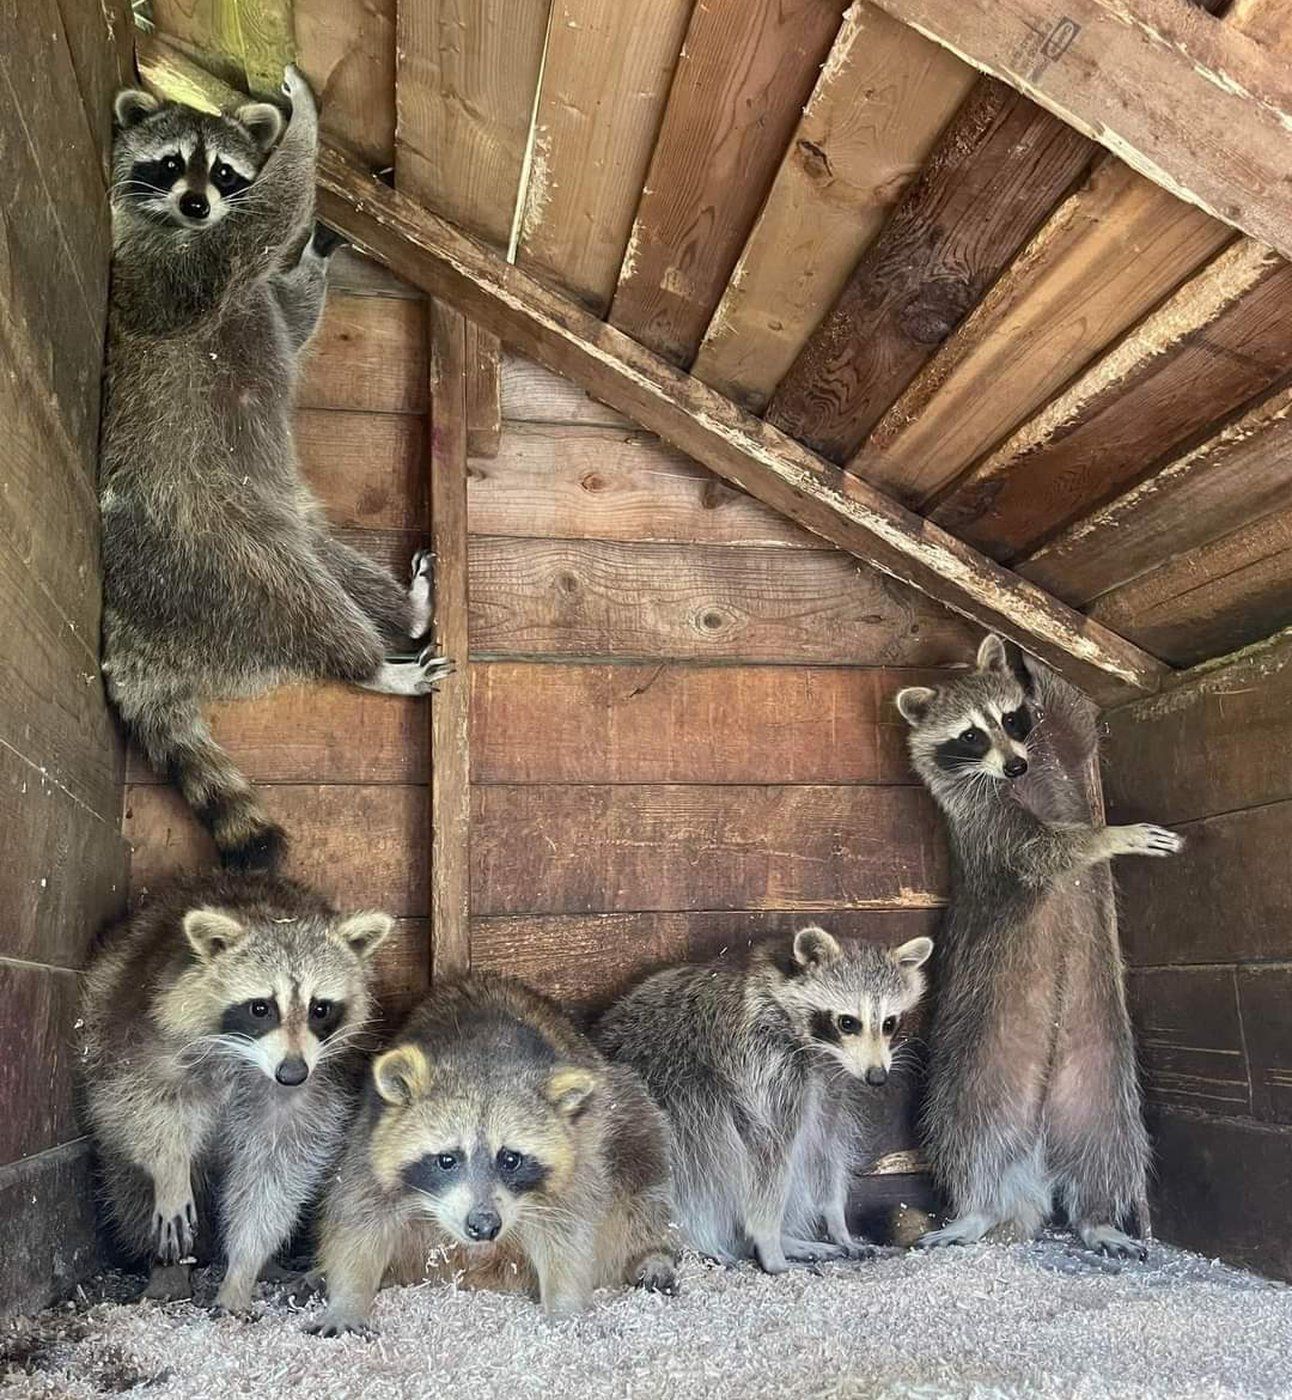 95 raccoons seized from Ontario rehab facility that says it has done nothing wrong